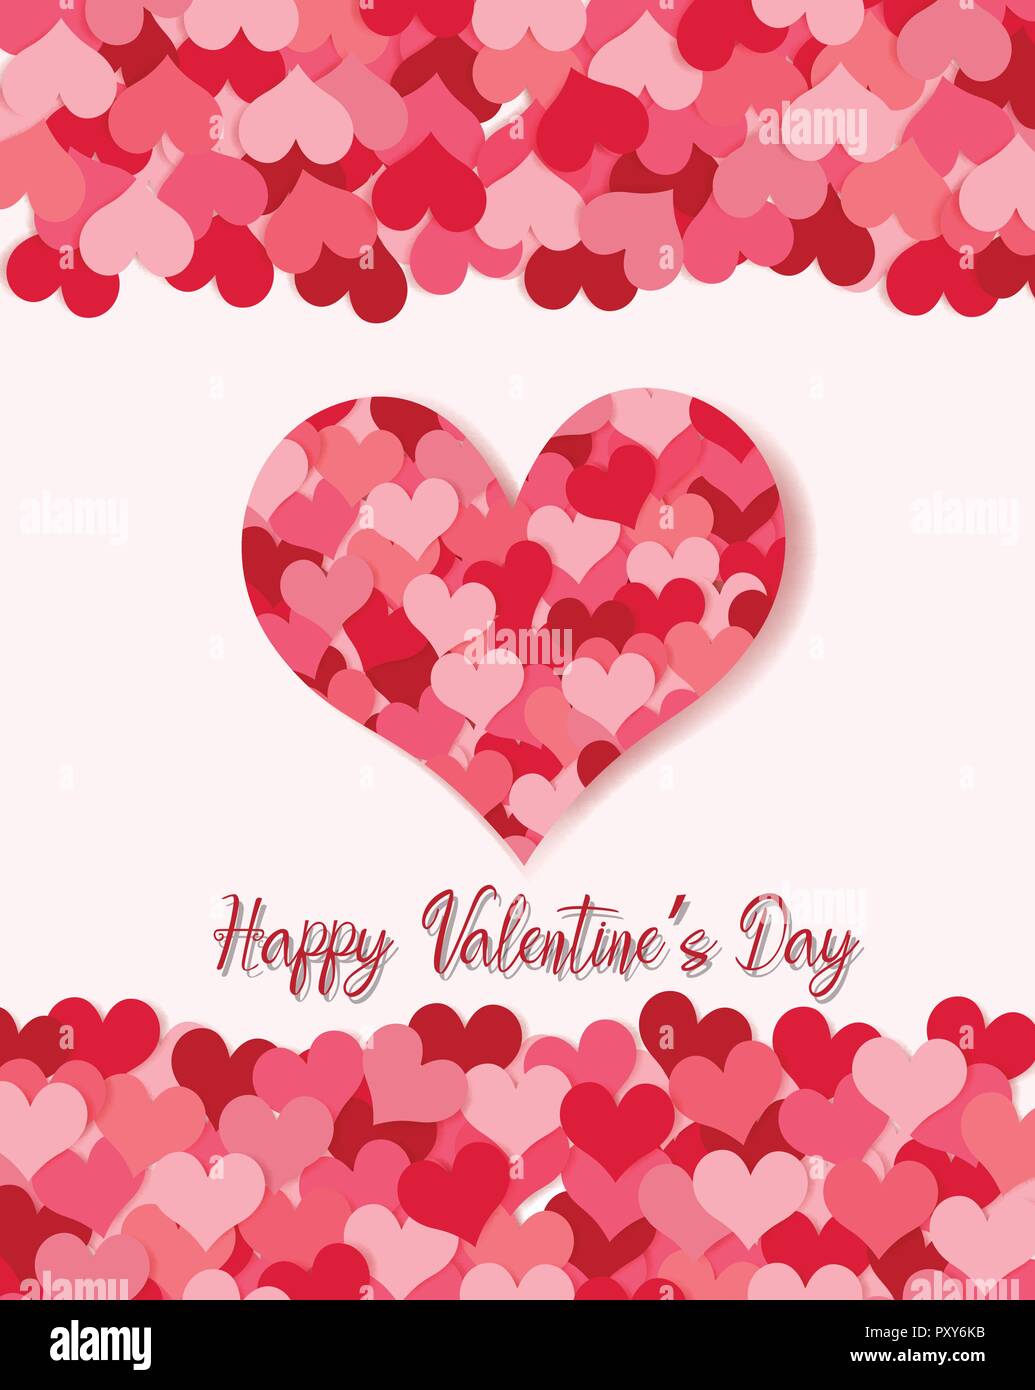 Valentine card design with many hearts illustration Stock Vector Image ...